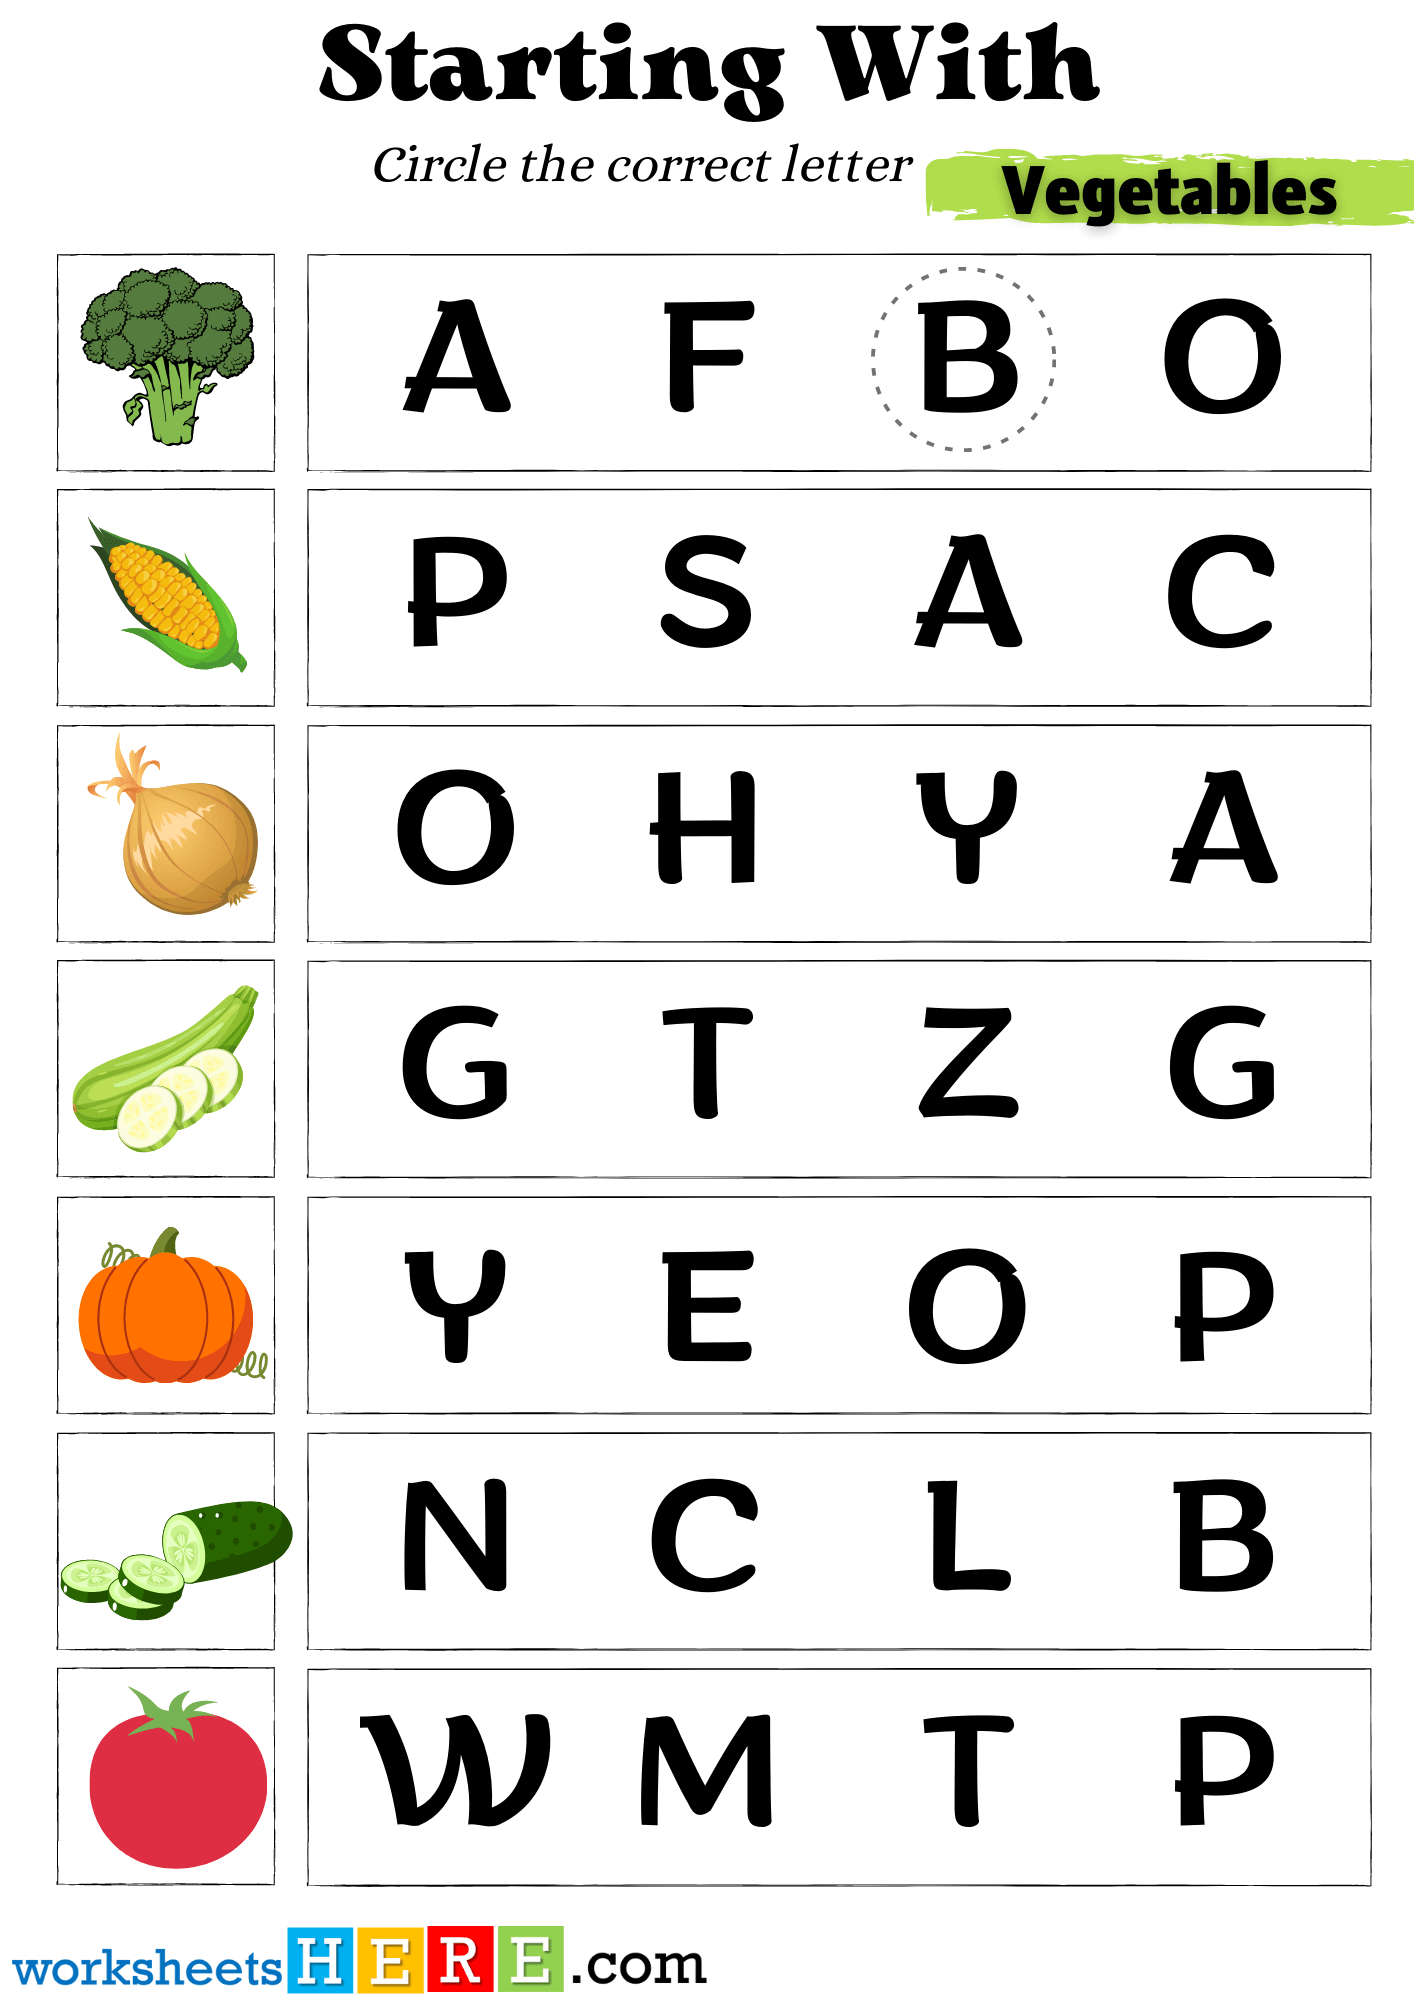 Find The Vegetables That Starts Beginning With The Correct Letter Pdf Worksheet